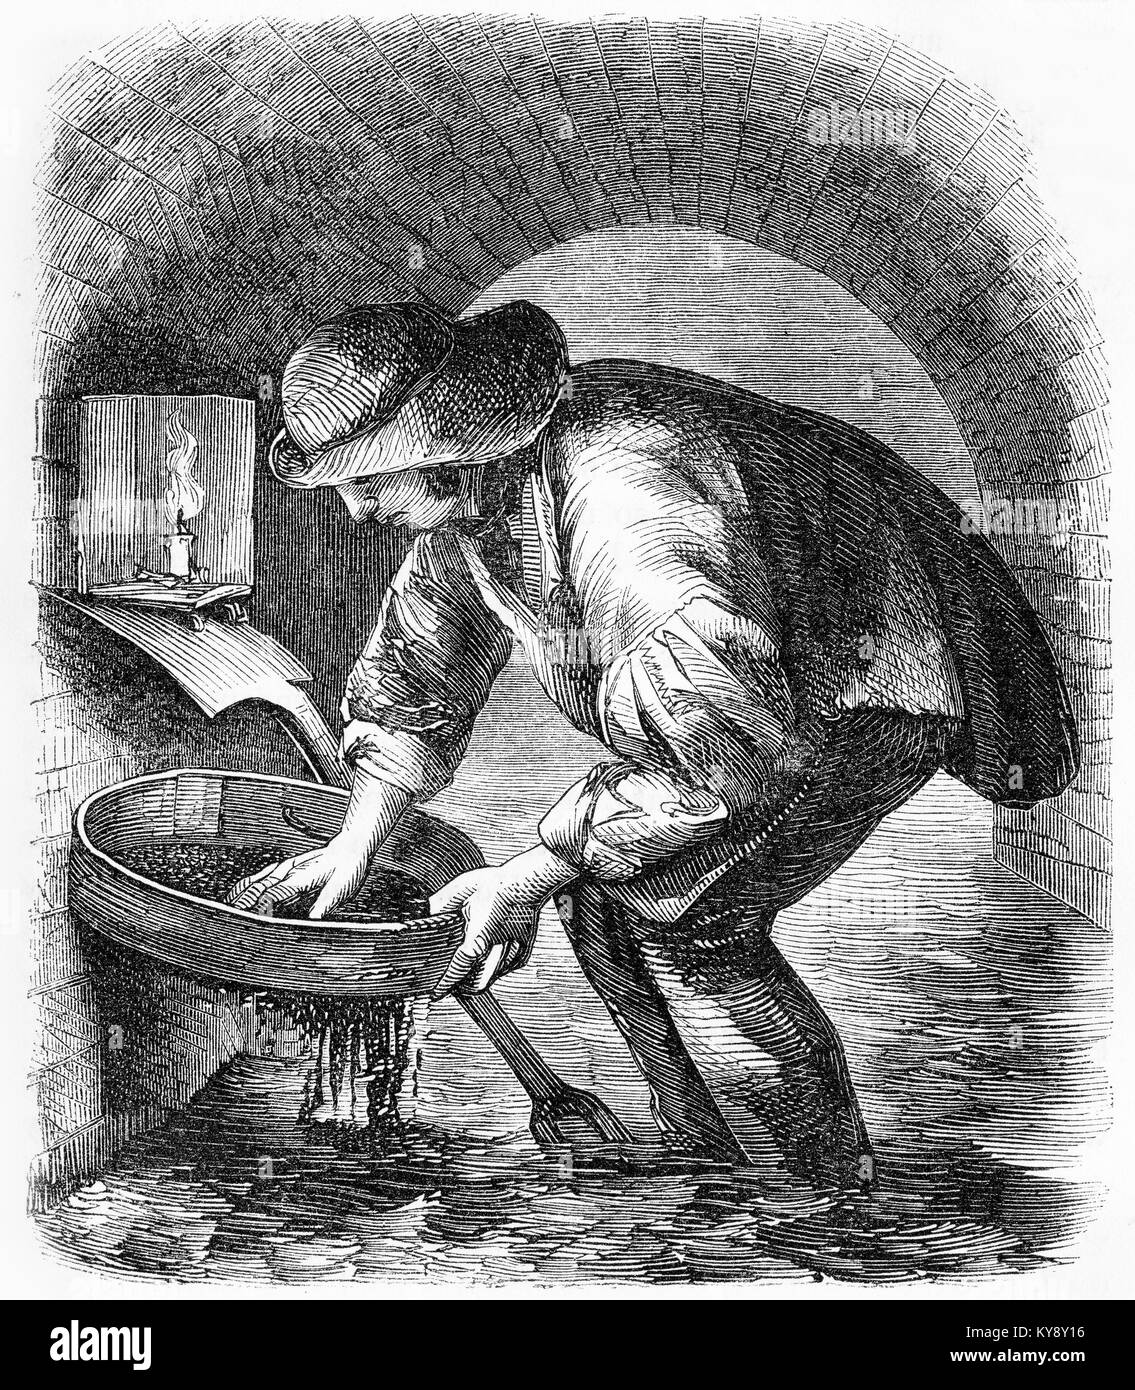 Engraving of a sewer hunter commonly at work cleaning the sewers of London during the Victorian era. From an original engraving in the Harper's Story Books by Jacob Abbott, 1854. Stock Photo